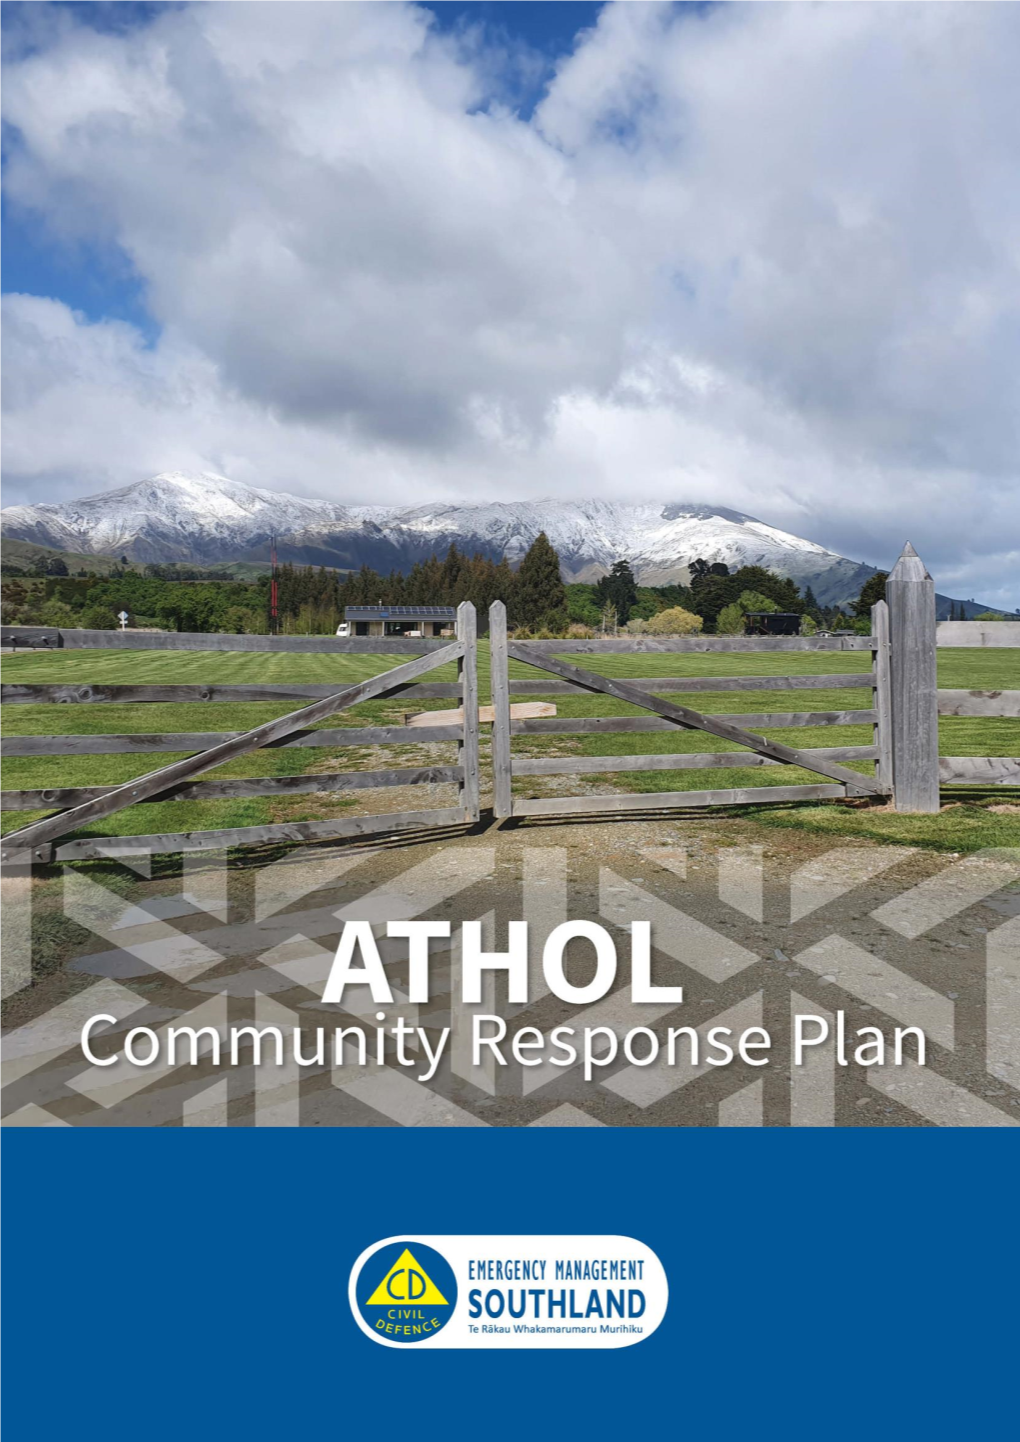 Athol Community Response Plan 2020 Find More Information on How You Can Be Prepared for an Emergency